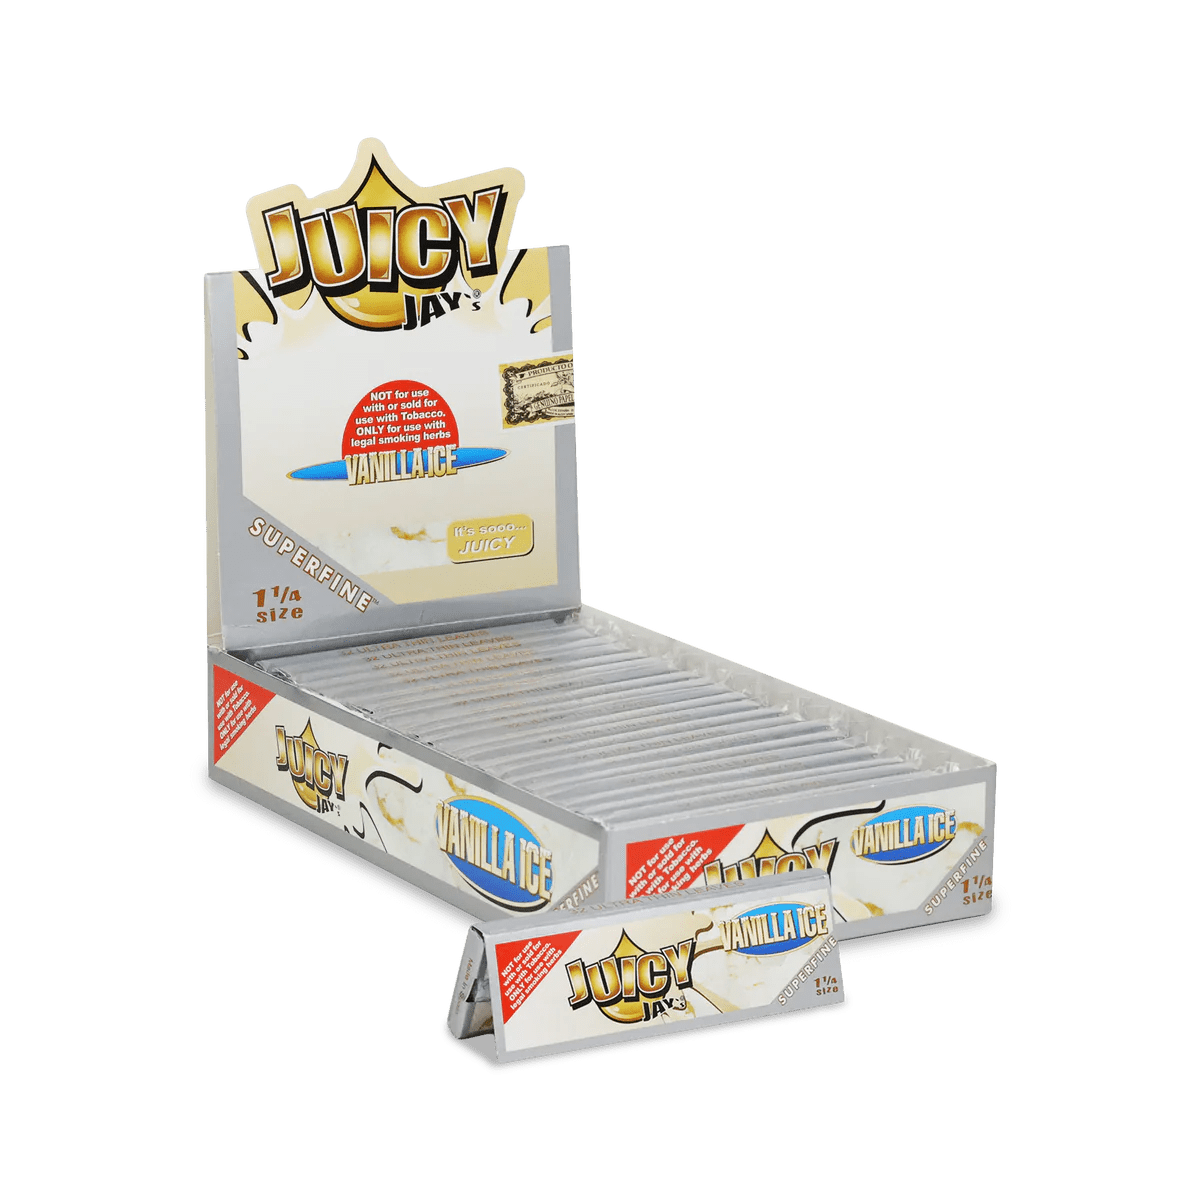 Juicy Jay Rolling Paper Vanilla Ice / Box of 24 Super Fine Rolling Papers